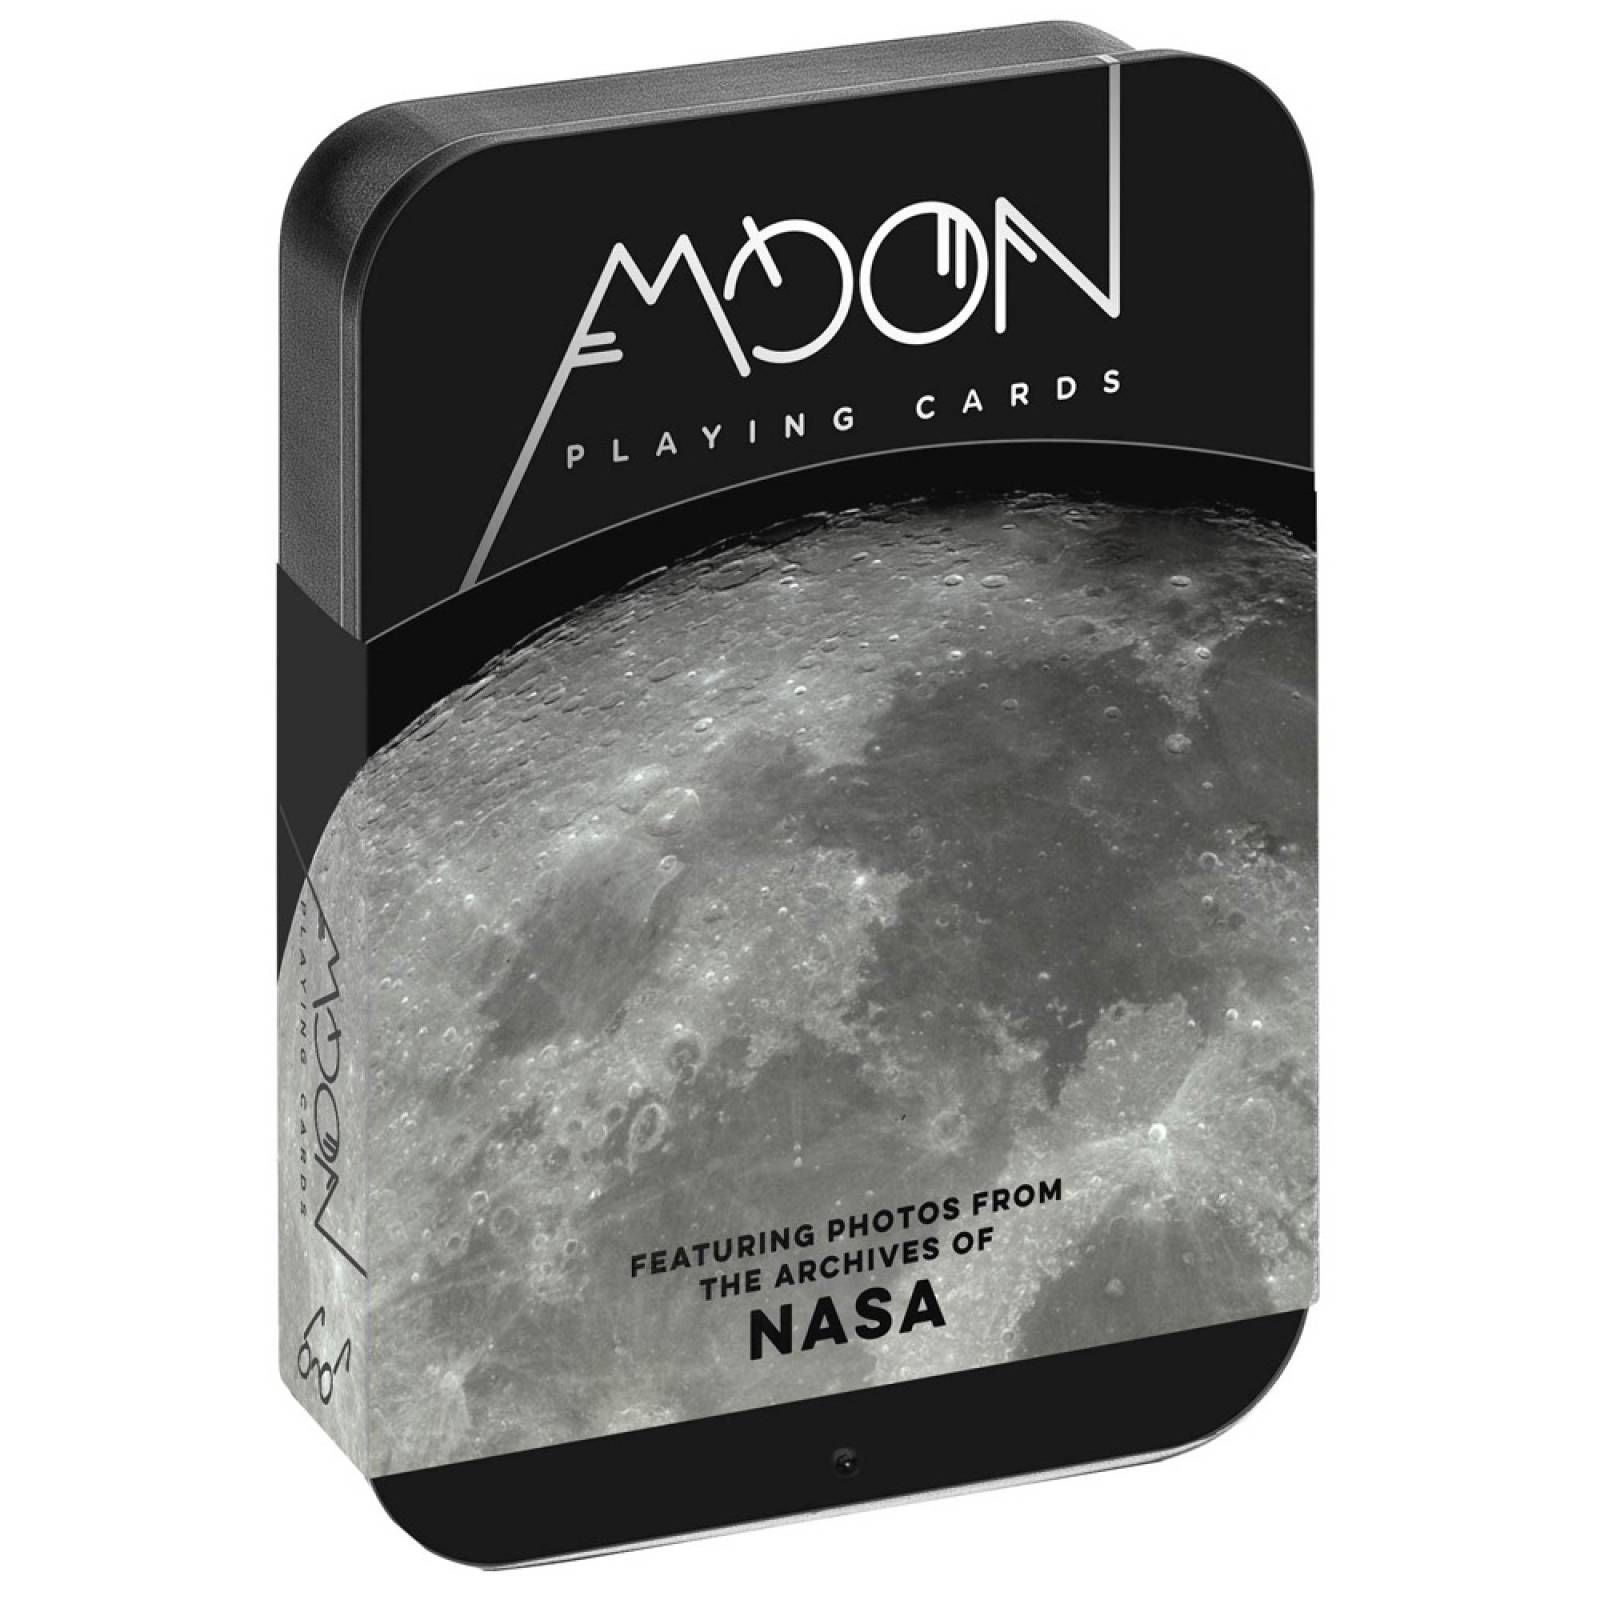 Moon Set Of Playing Cards